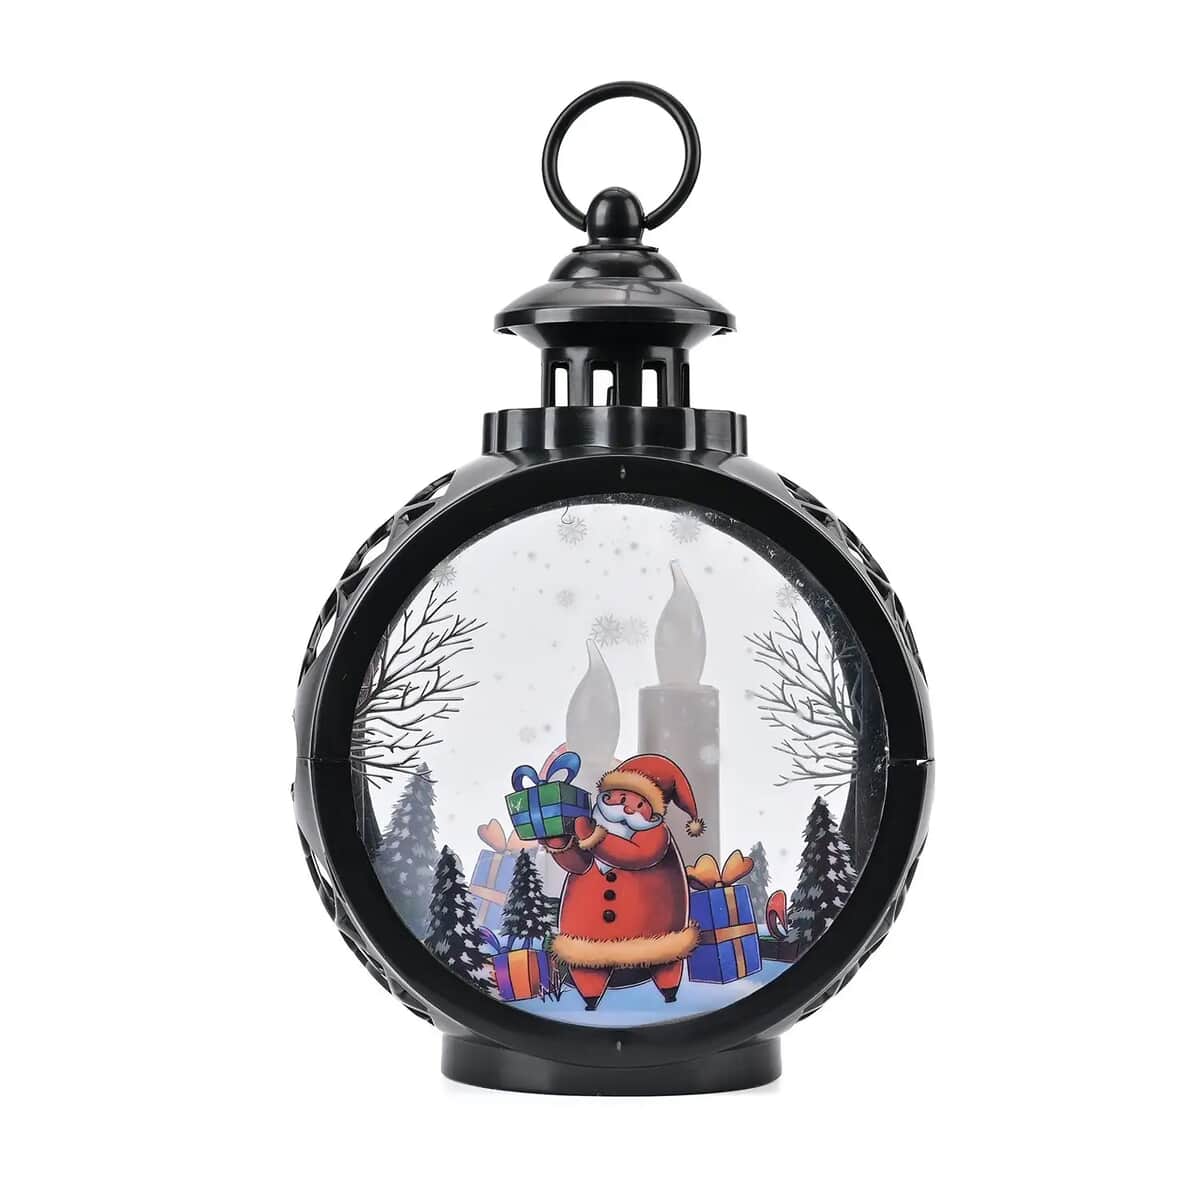 Hanging Lantern Christmas LED Light (3*AAA Batteries Not Included) - Black image number 0